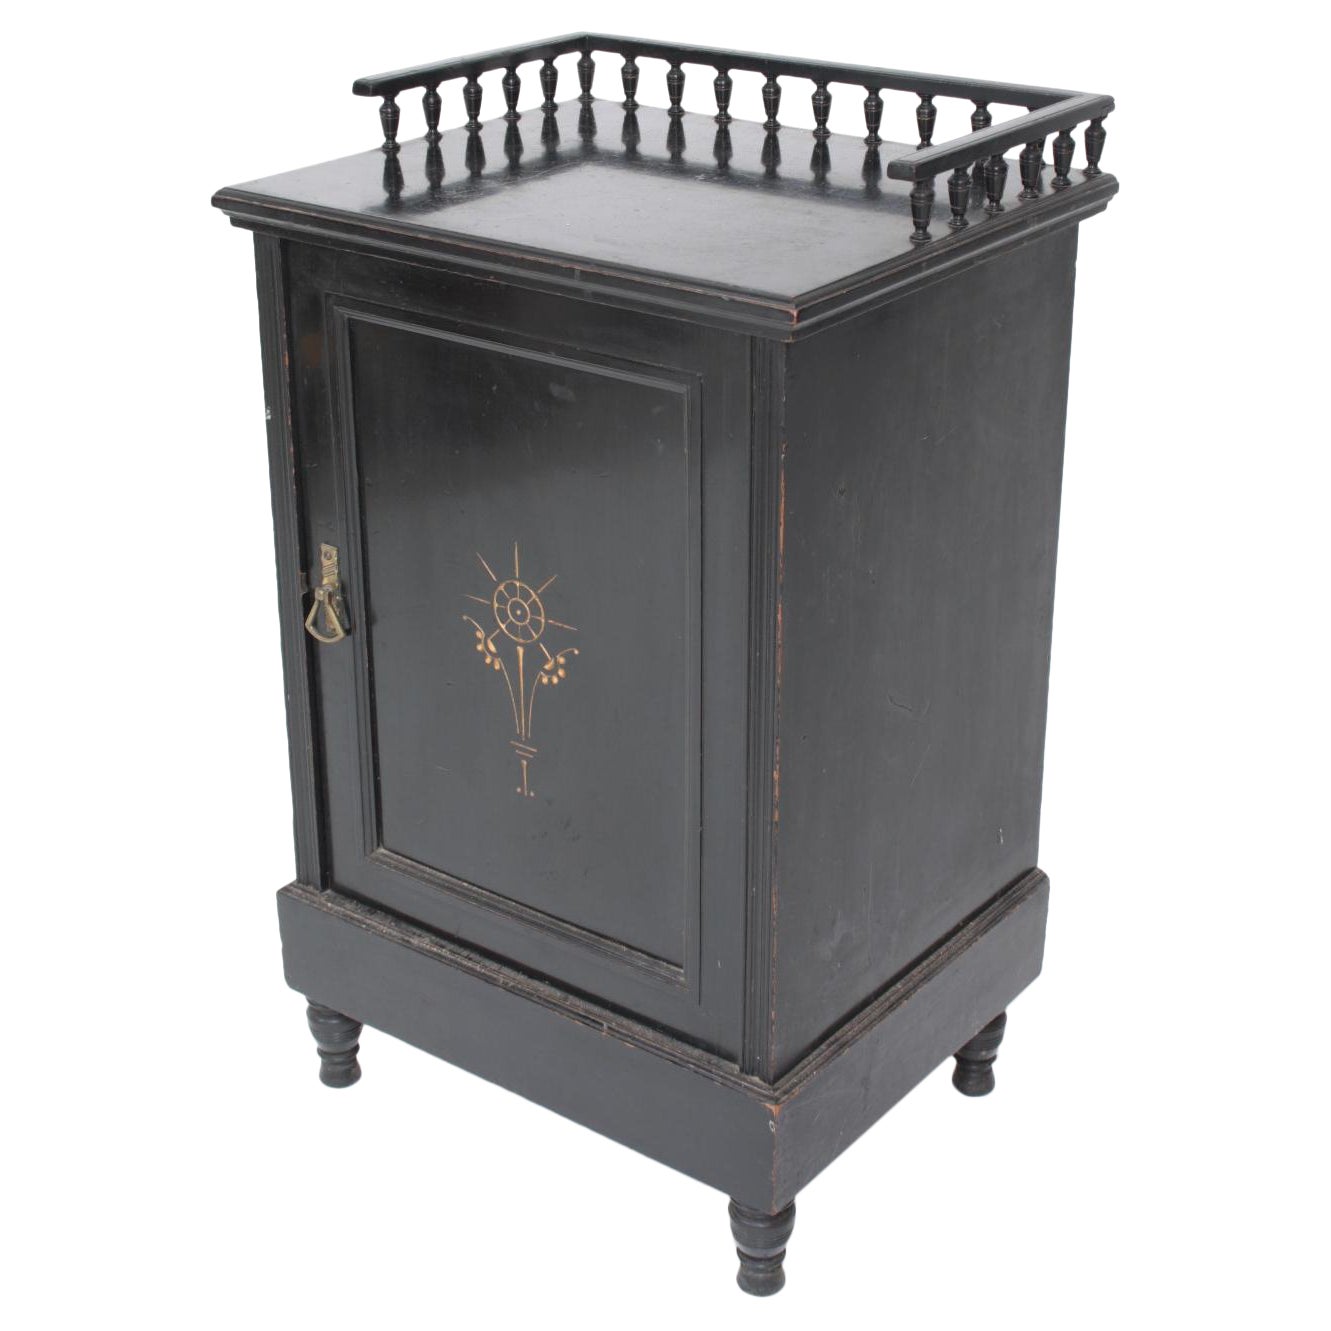 Dr C Dresser, Style of, an Aesthetic Movement Ebonized & Gilt Bedside Cabinet For Sale